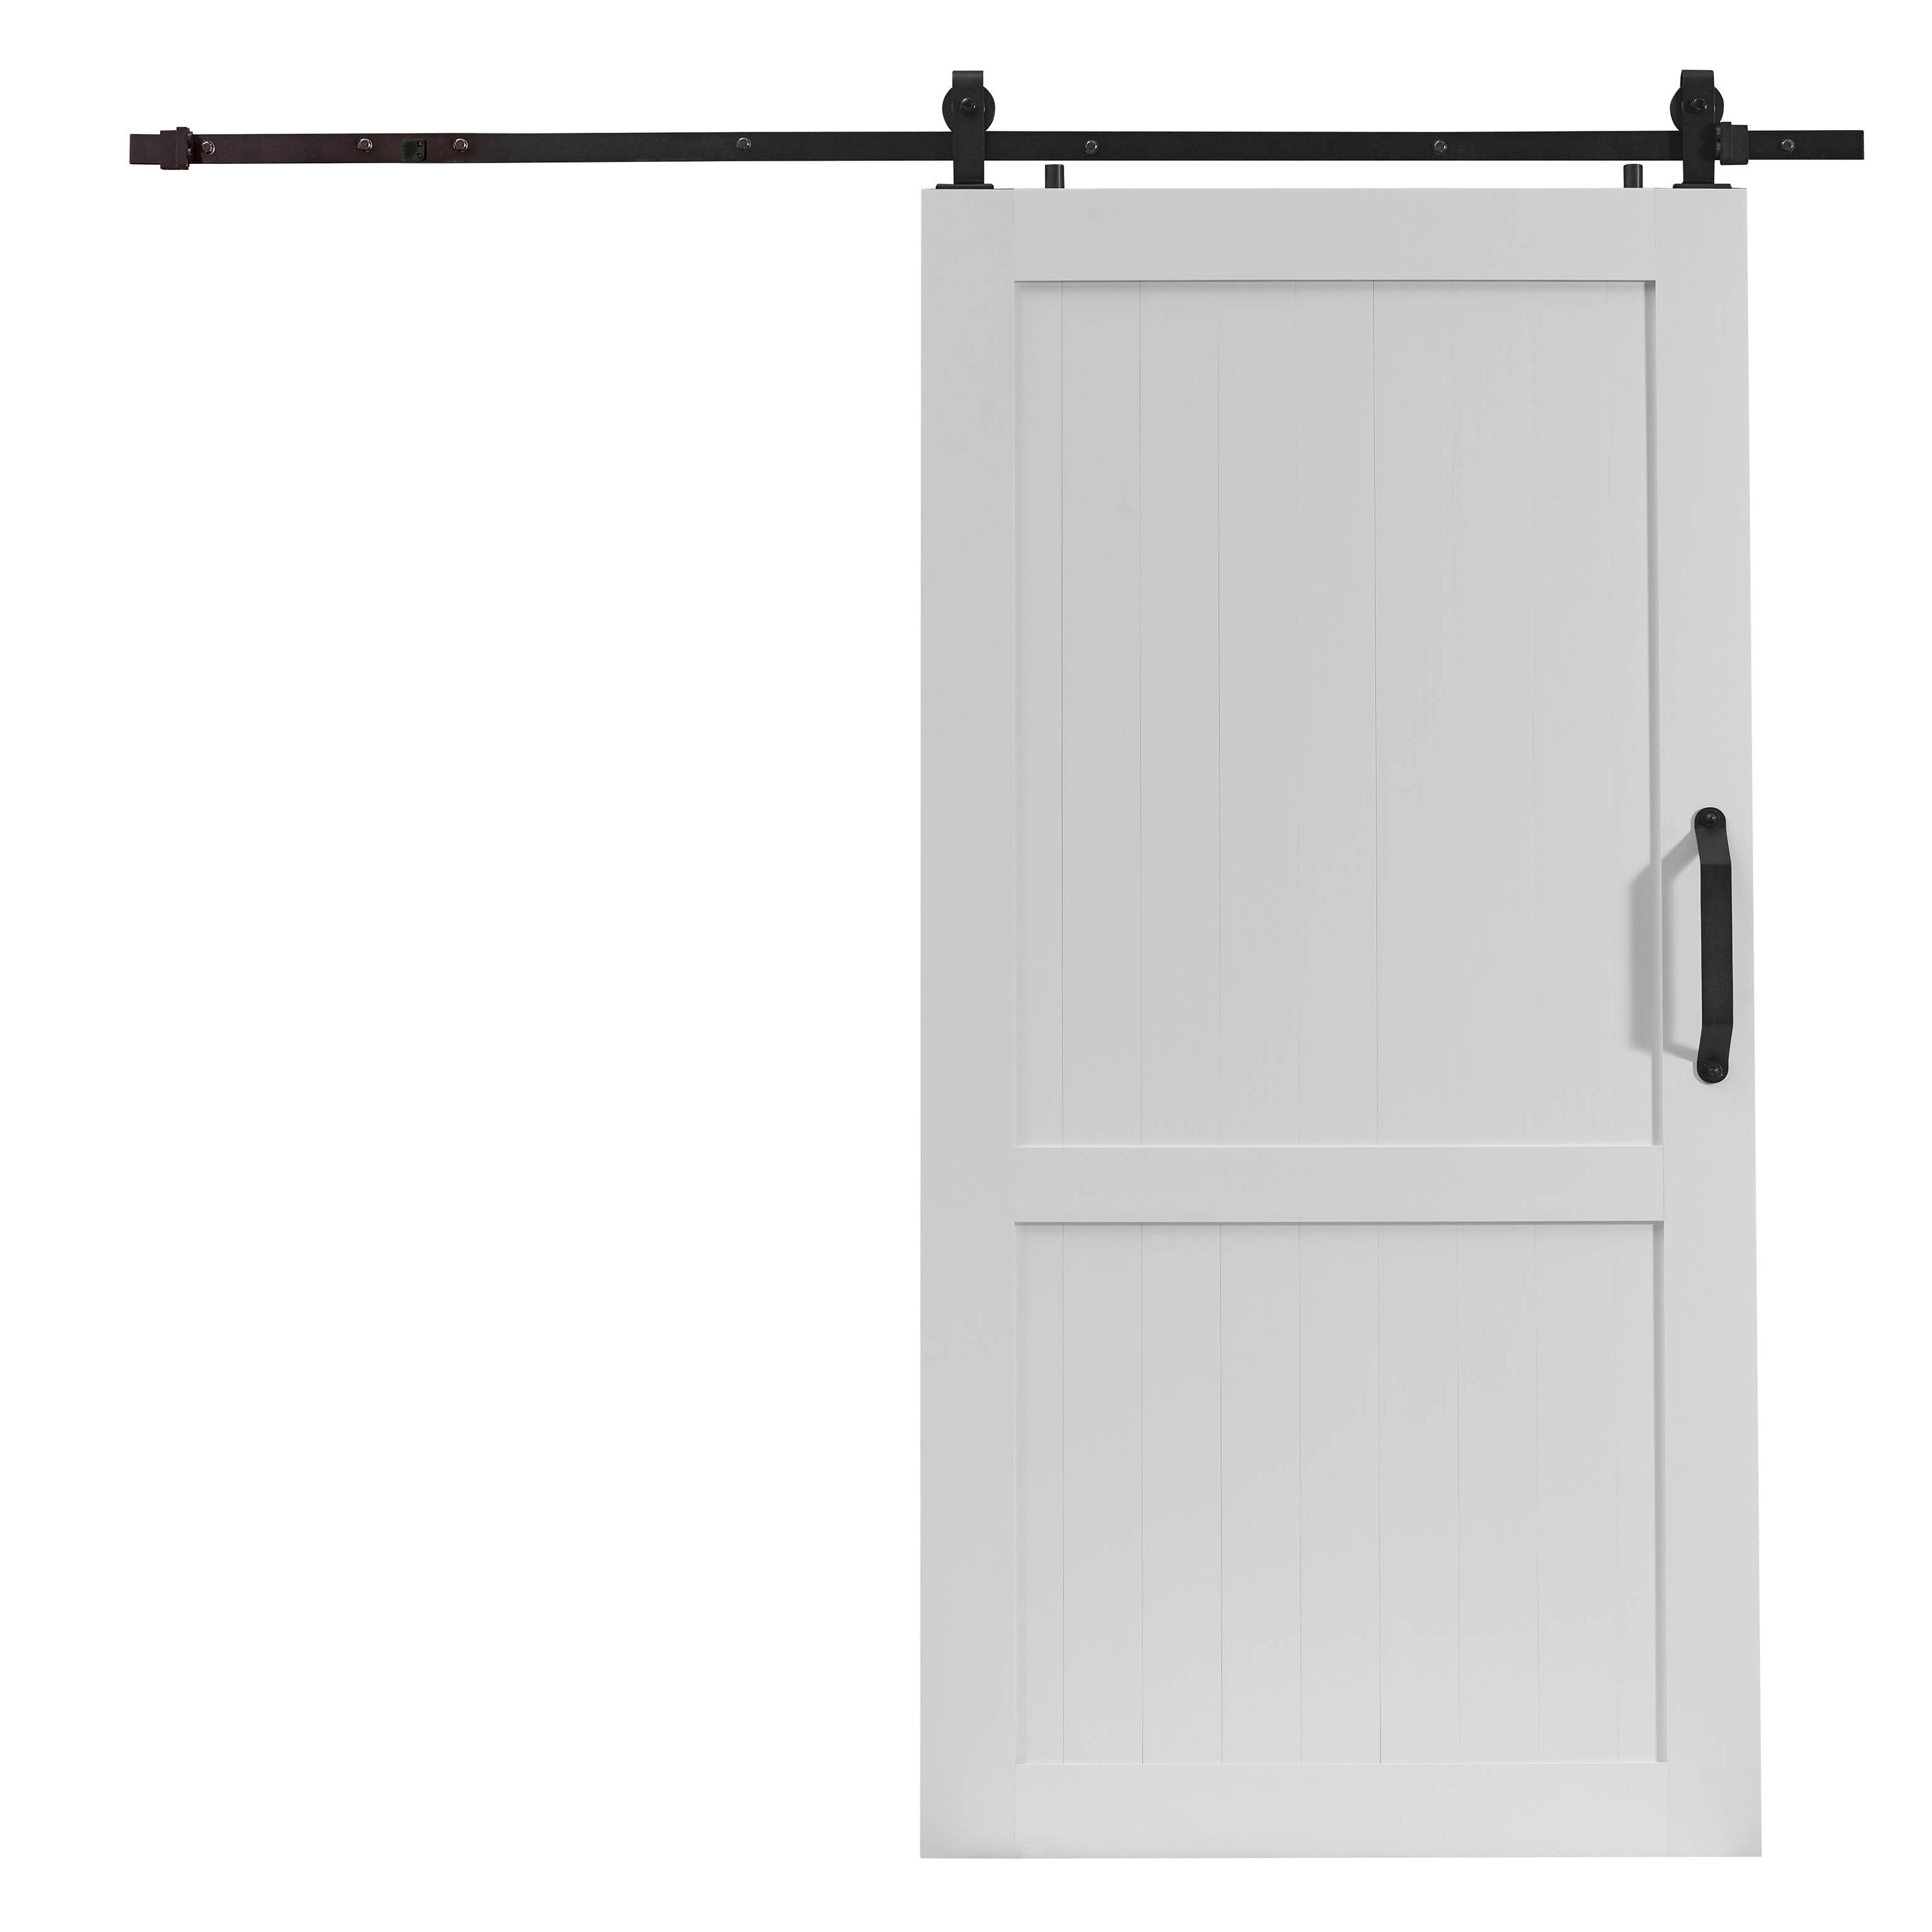 LTL Home Products MLB4284WGHKD Millbrooke Ready to Assemble PVC Barn Door Kit X for sale online